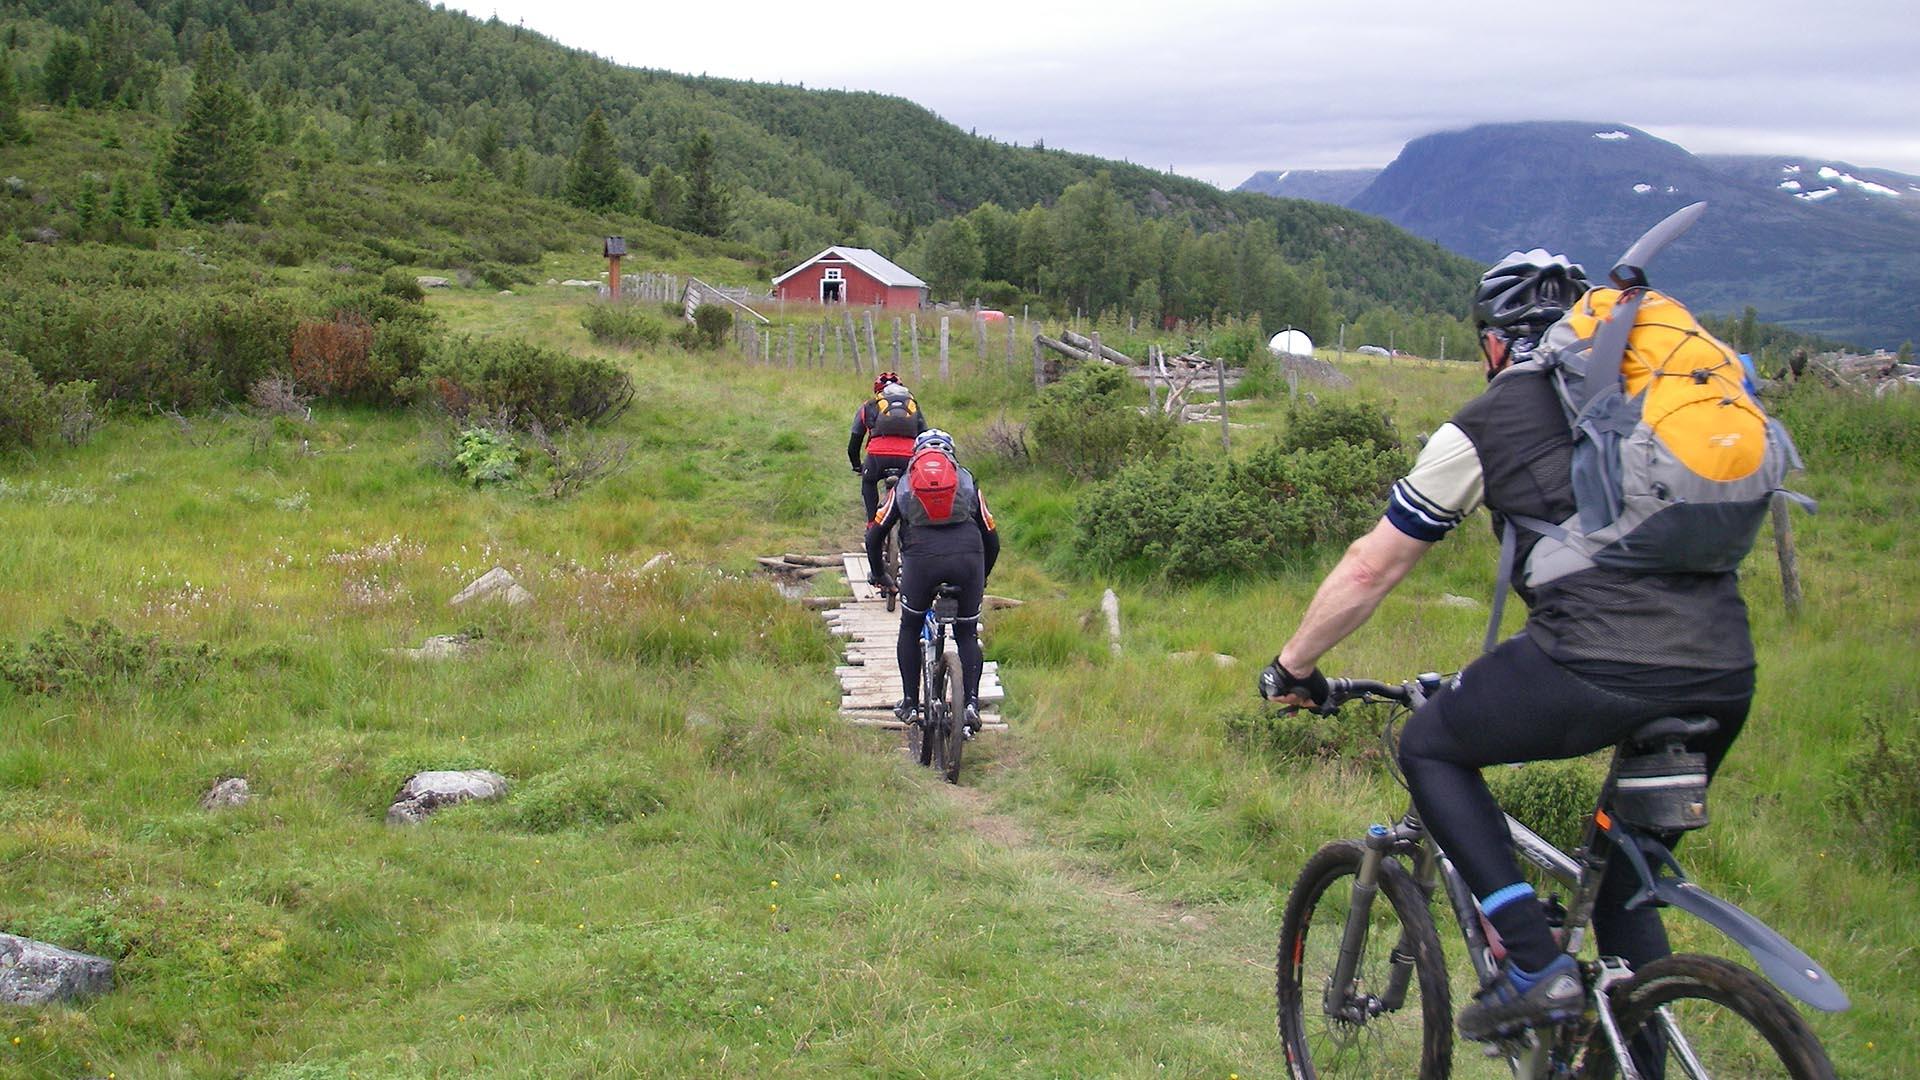 Mountainbikers on a grass trail in a mountain farming area with juniper bushes and a red farm hut nestled in the terrain in the background.